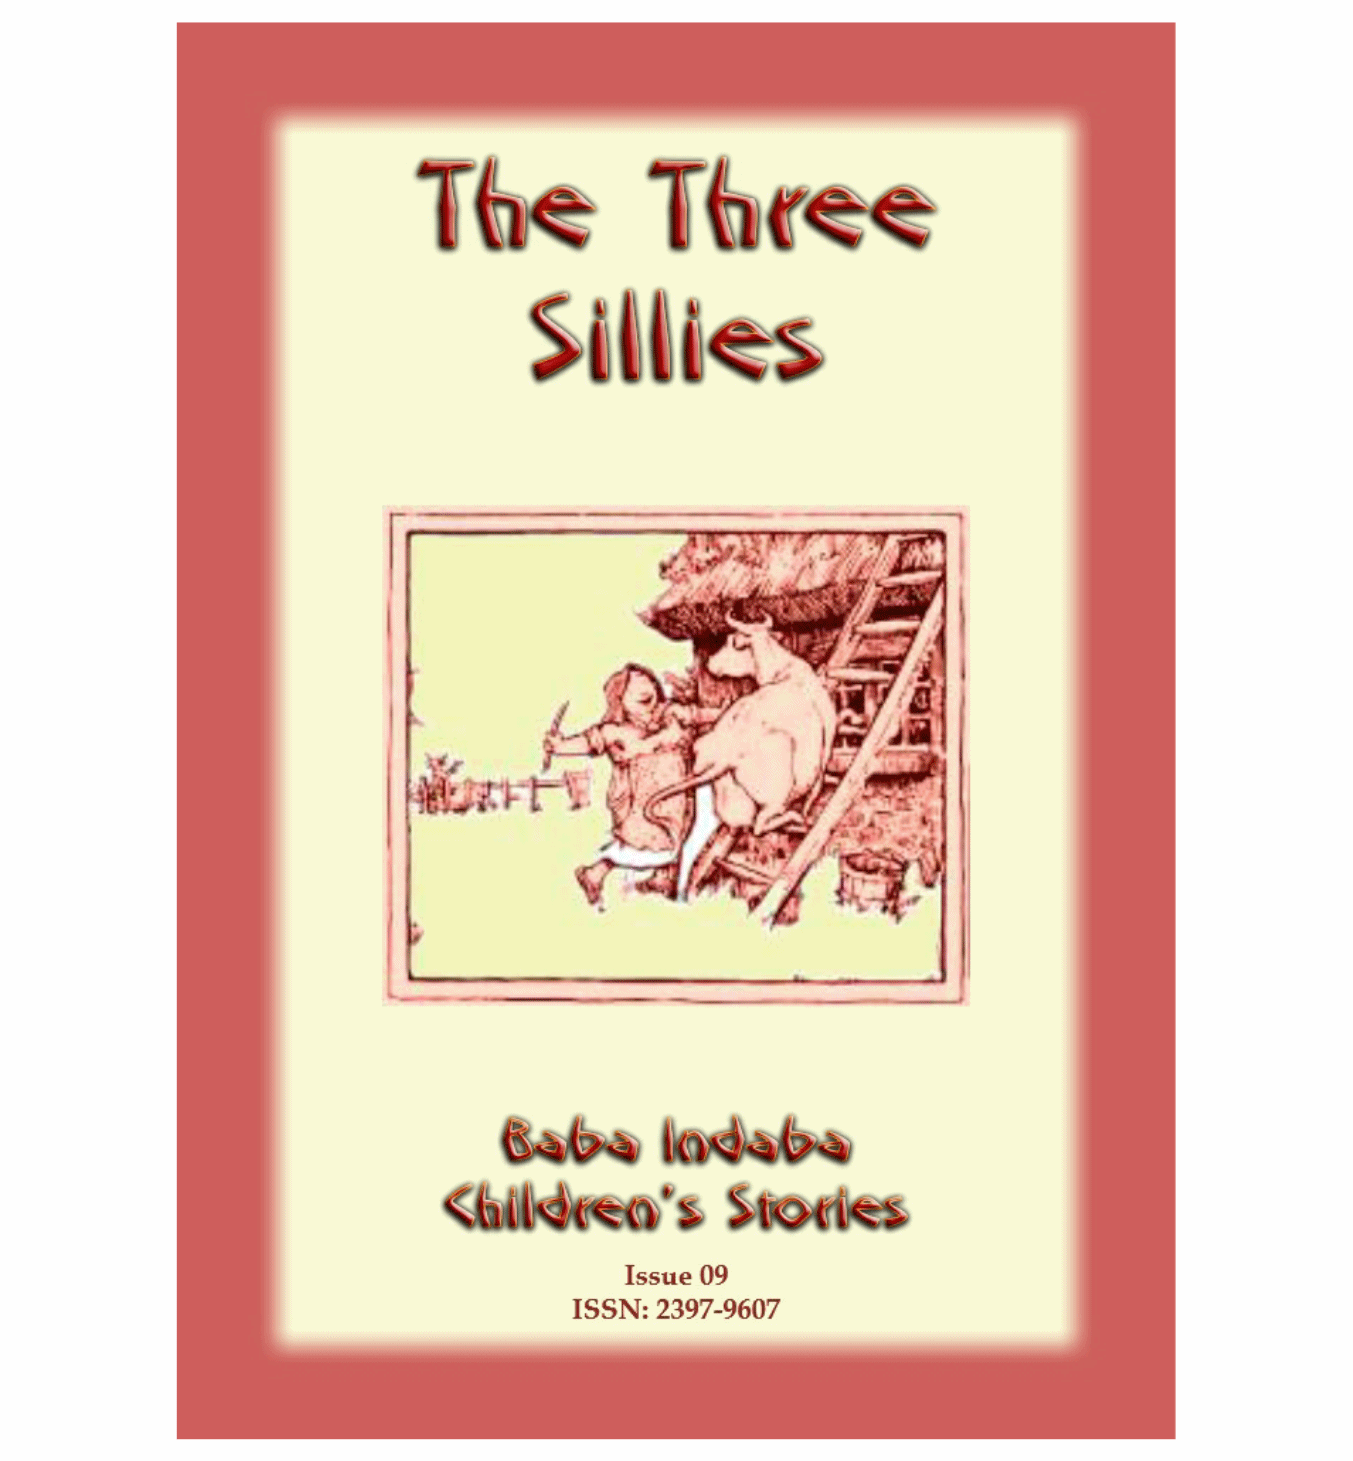 THE THREE SILLIES - An old English folktale: Baba Indaba Children's Stories Issue 09 